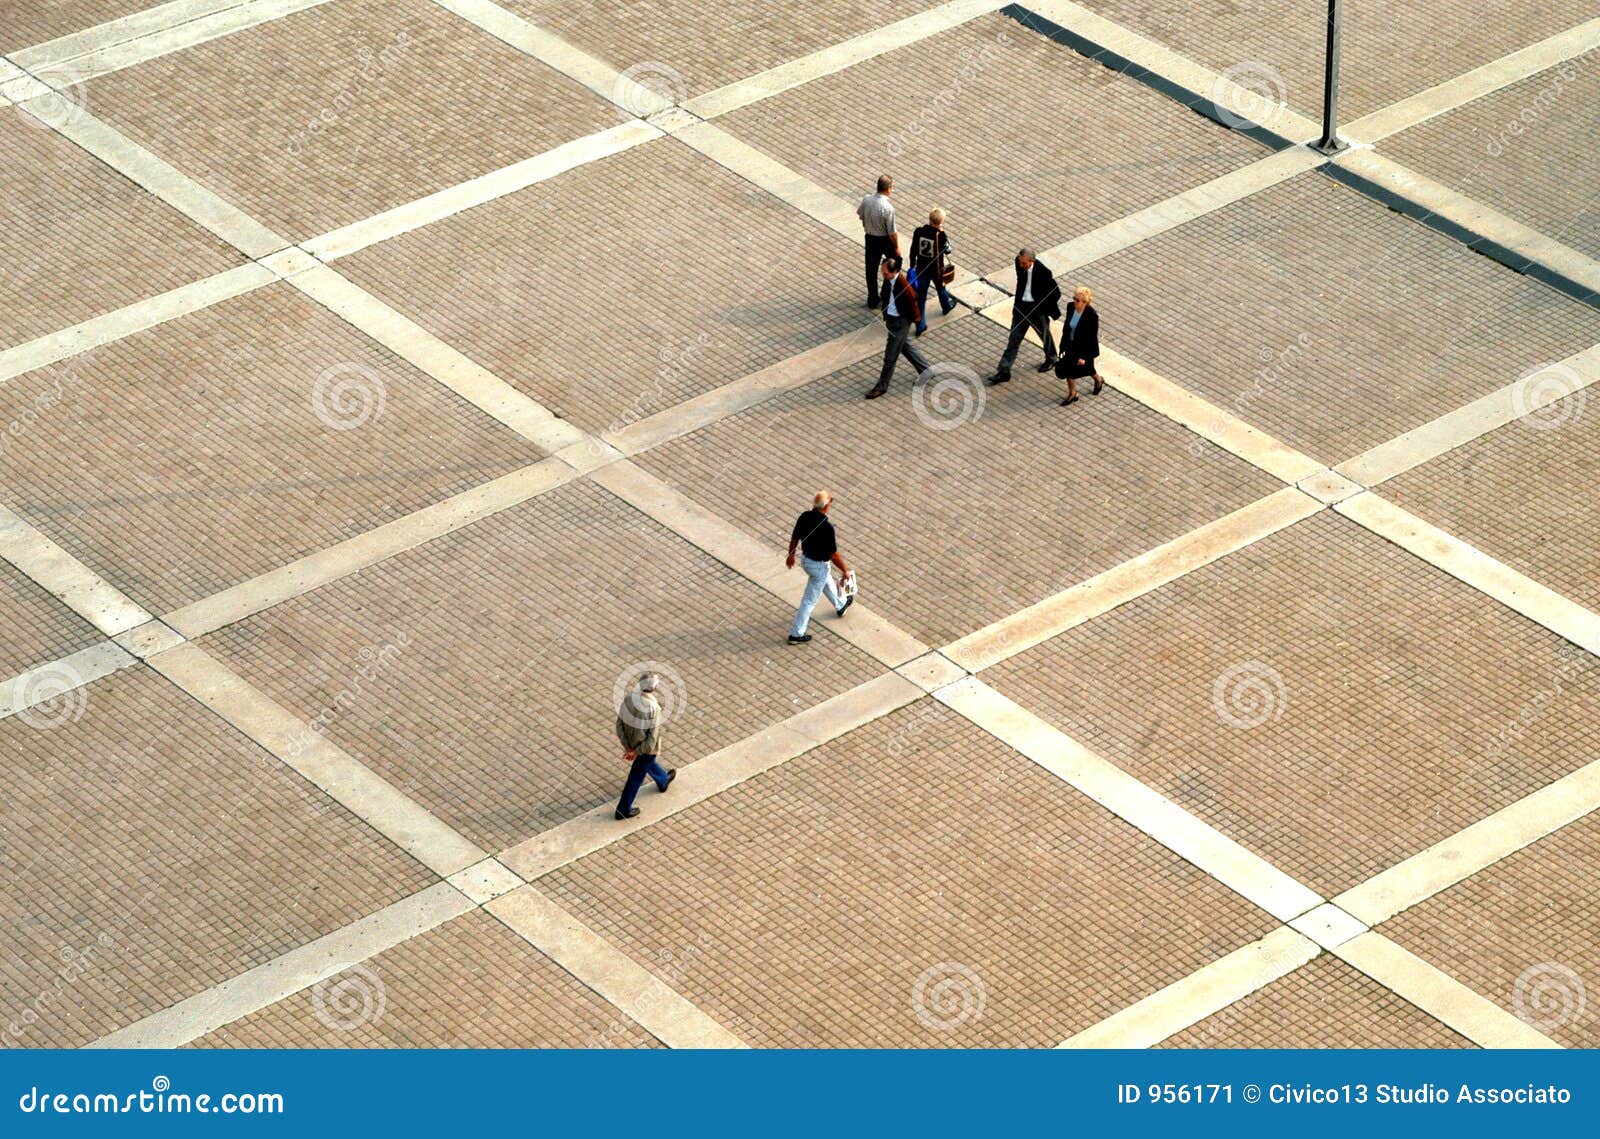 people in plaza